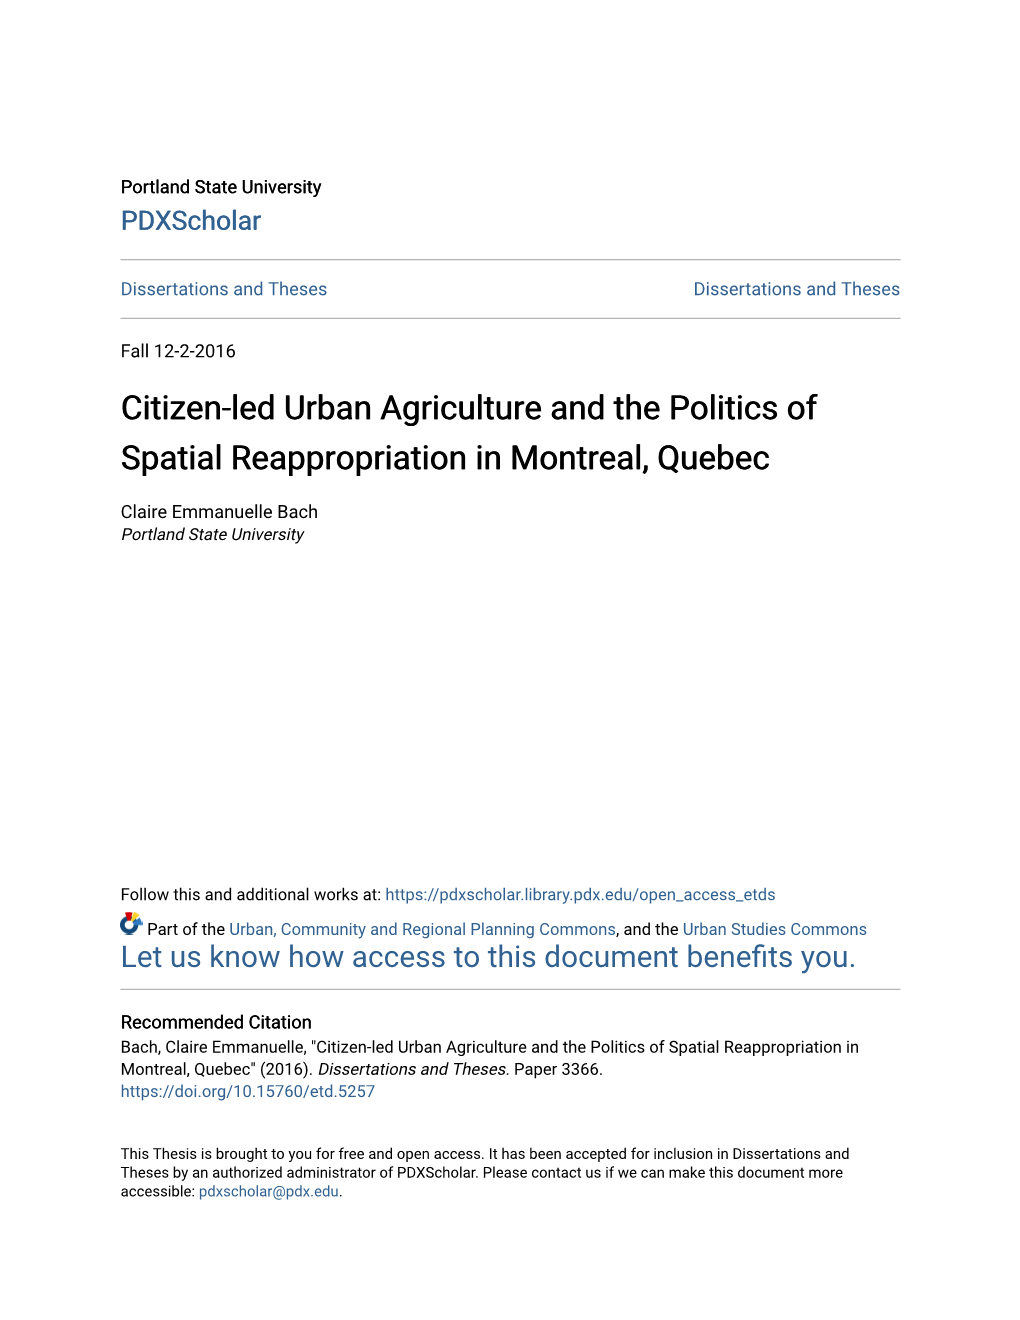 Citizen-Led Urban Agriculture and the Politics of Spatial Reappropriation in Montreal, Quebec